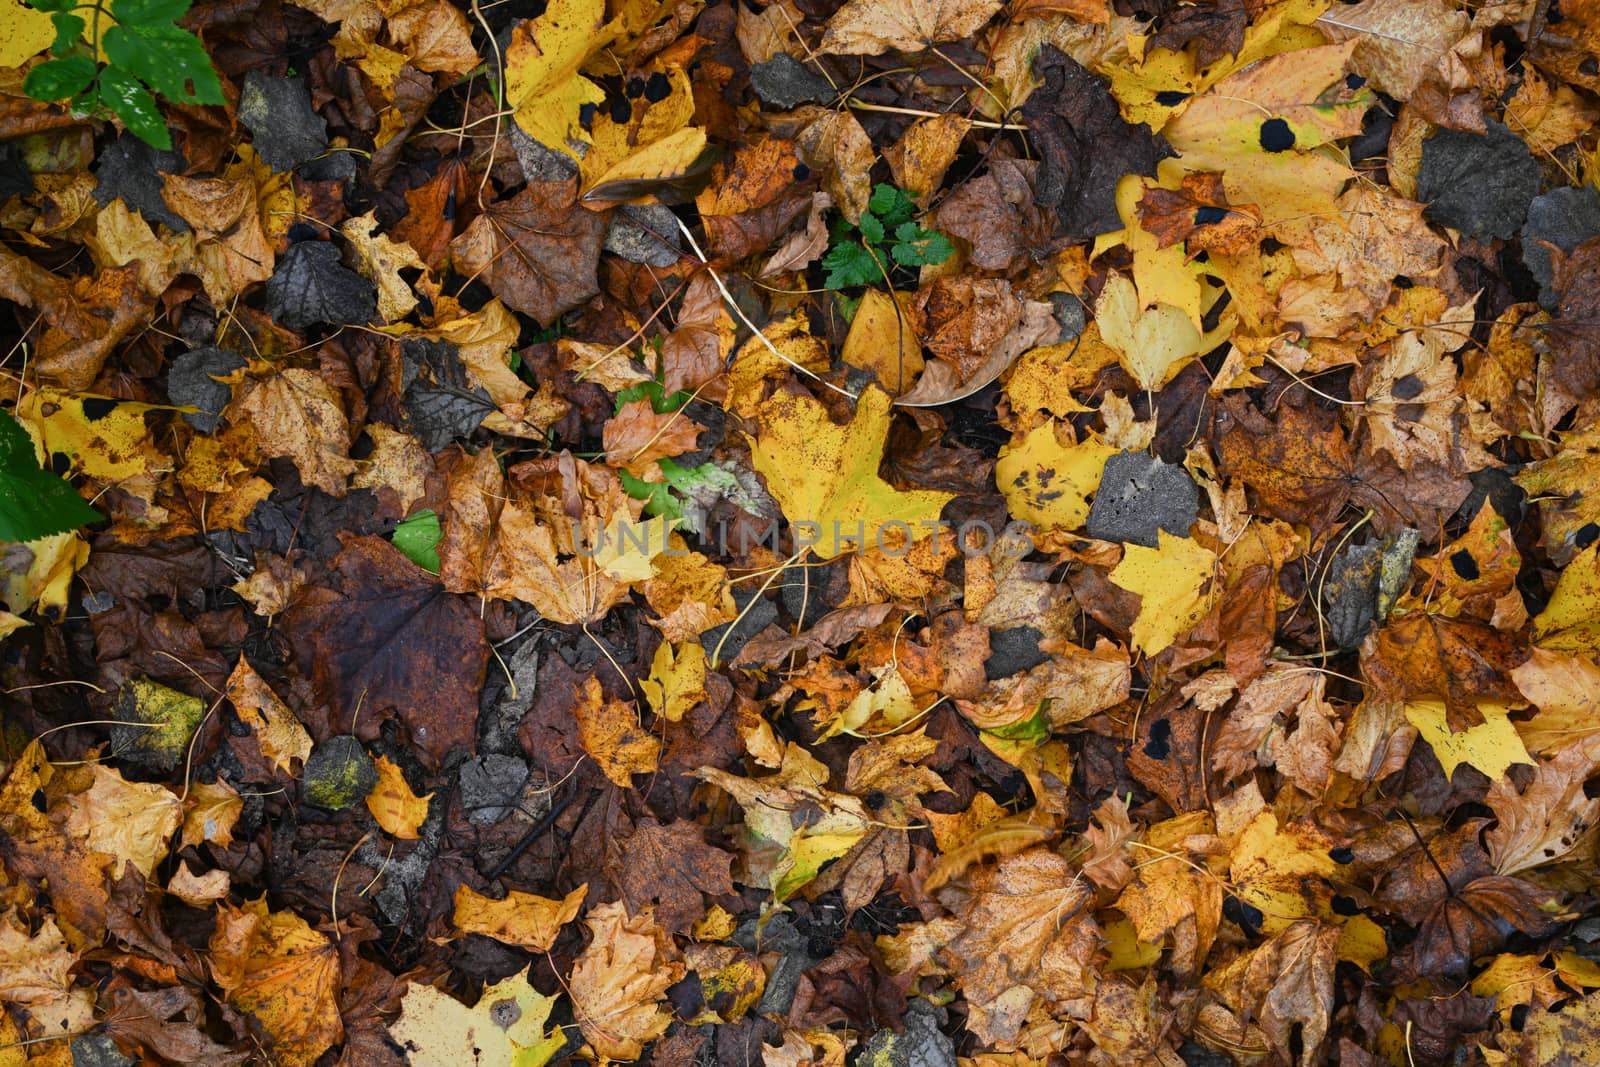 Colorful backround image of fallen autumn leaves perfect for seasonal